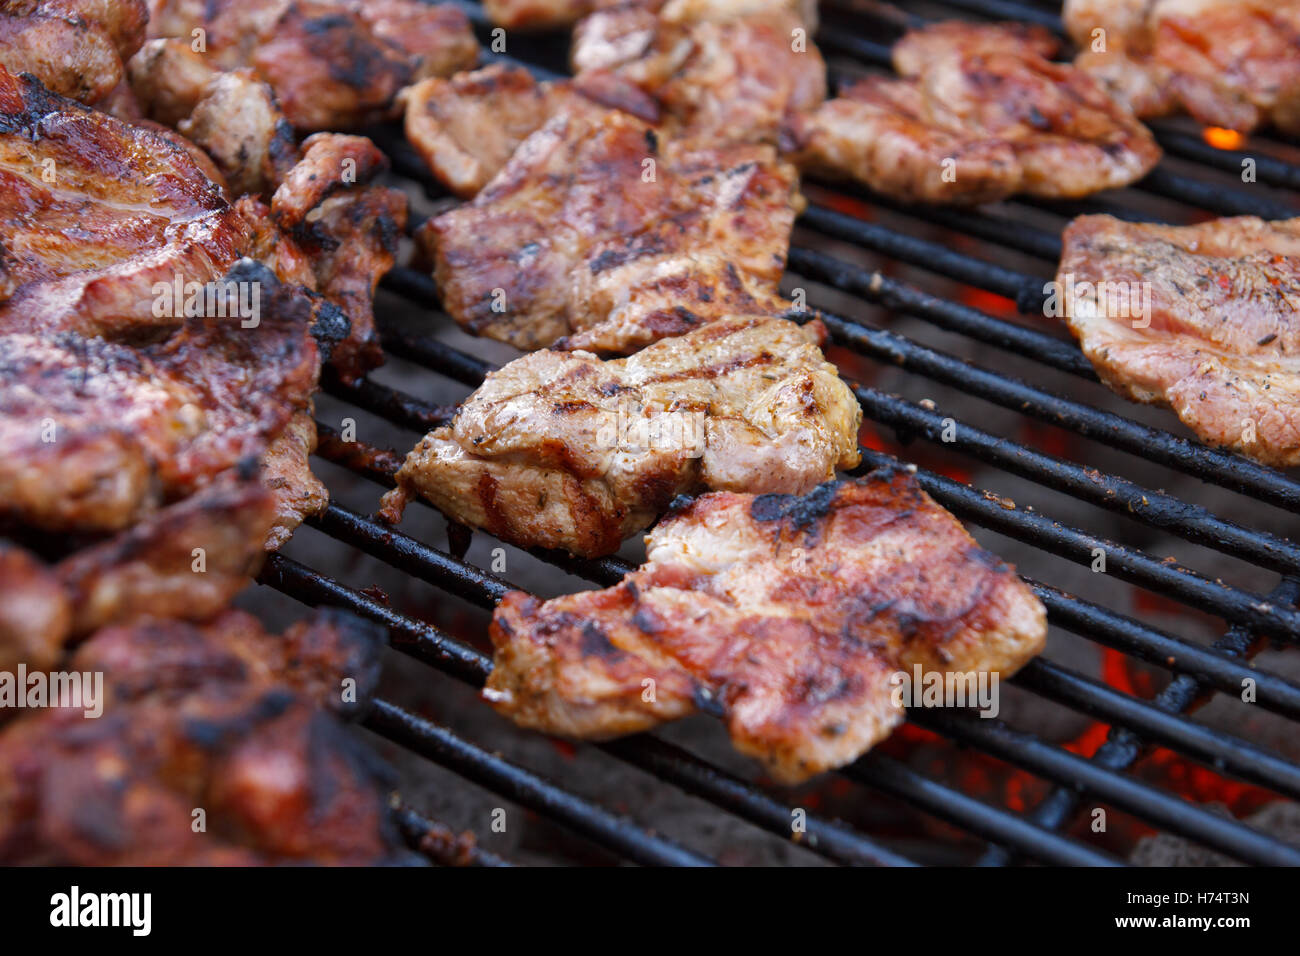 Many pieces of different kind of meat grilling on a barbeque grill. Selective focus. Stock Photo